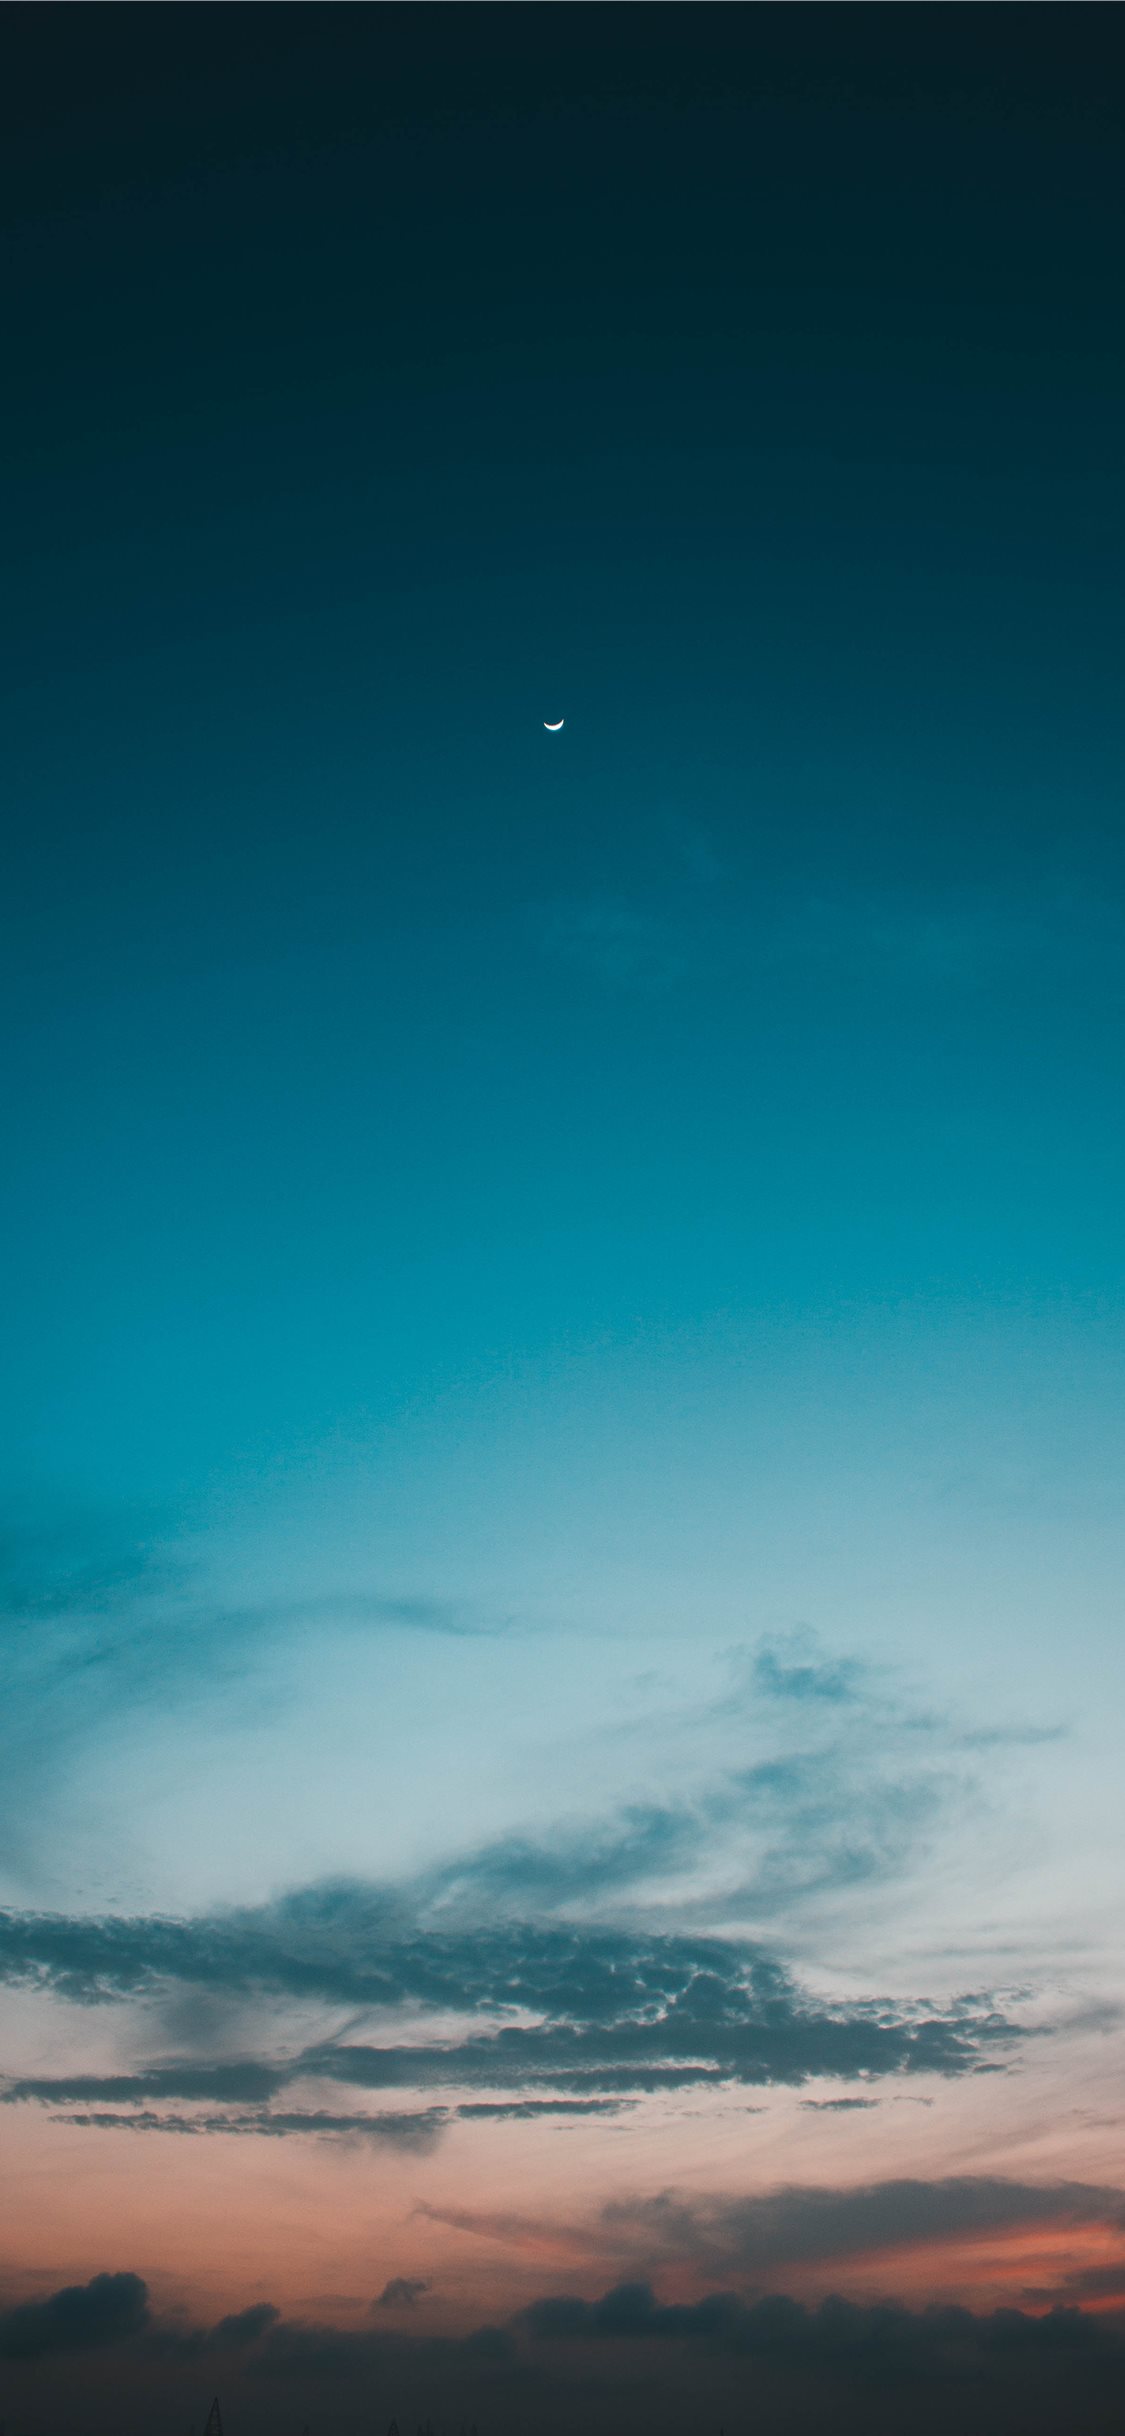 Setting moon iPhone X Wallpapers Free Download